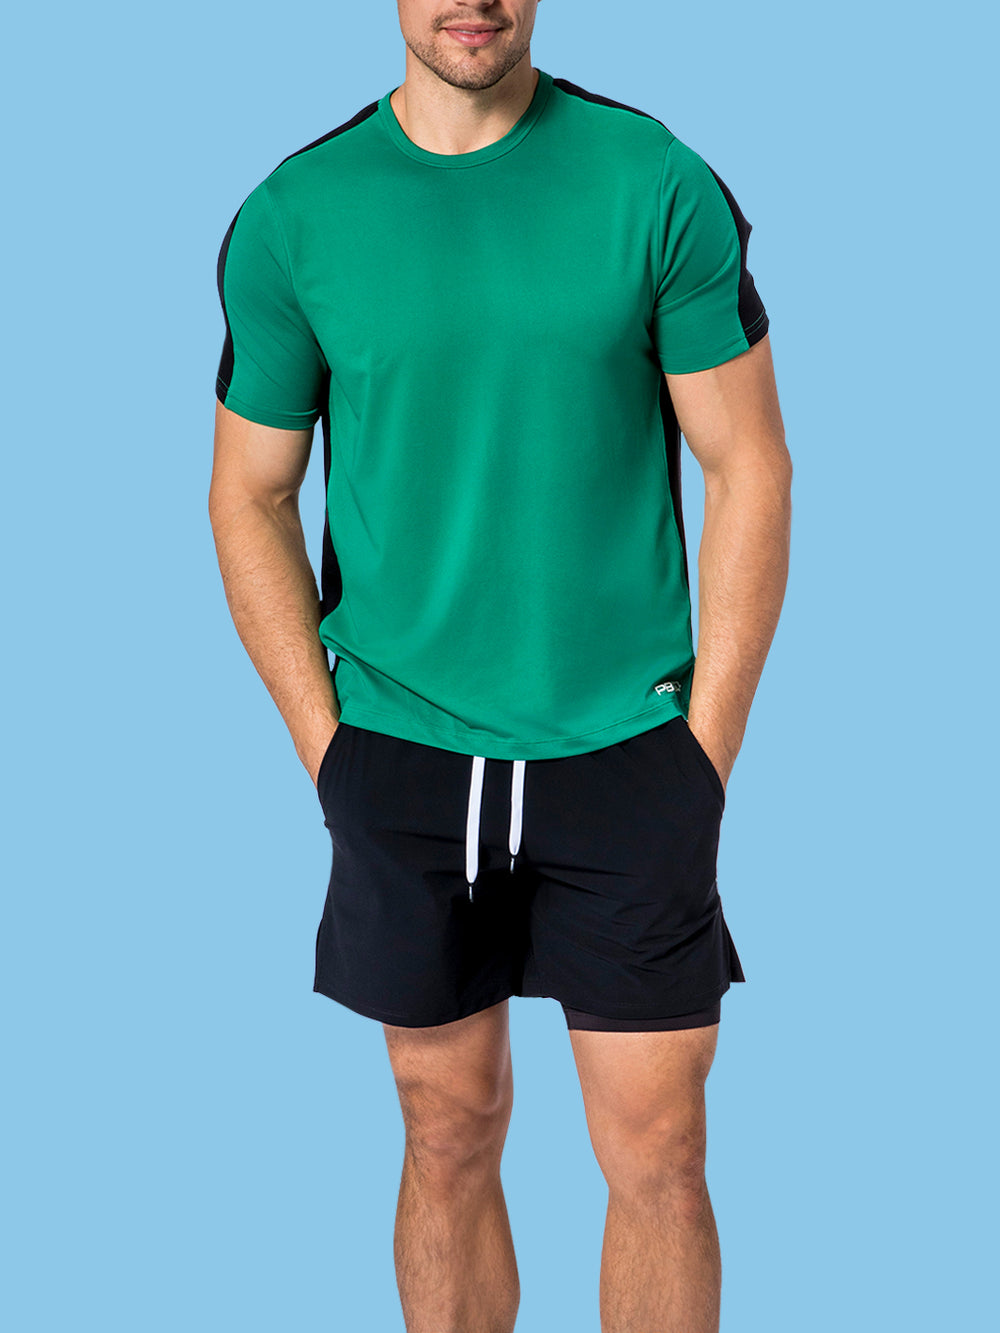 Model wearing PB5Star's jade men's Core Vented Tee with black side panels, ideal for sports and active lifestyle.